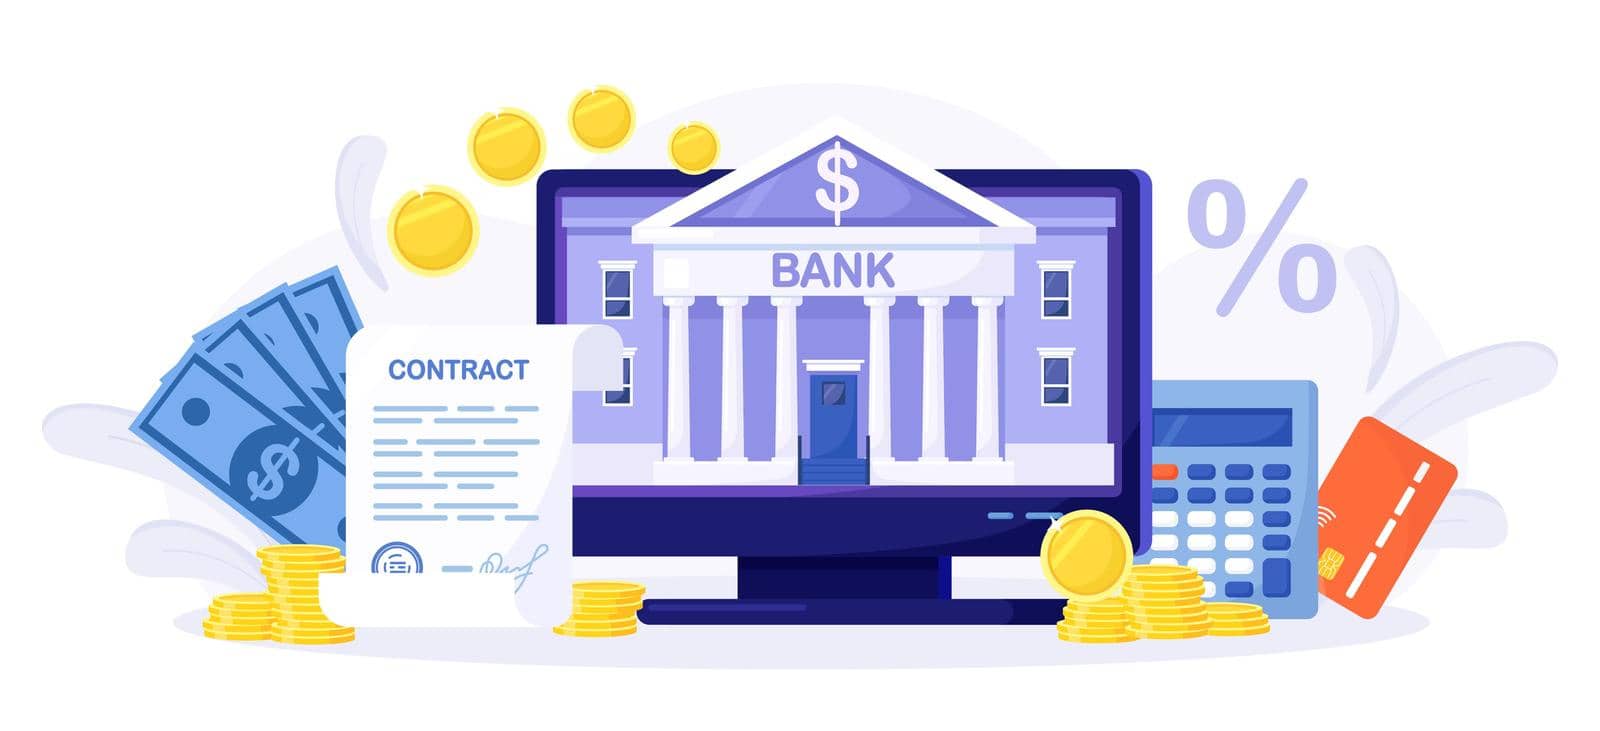 Mobile banking and internet payment. Online bank agreement. Loan contract. Financial building on computer screen. Banking Operation. Financial transactions, payments, money transfers and bank account